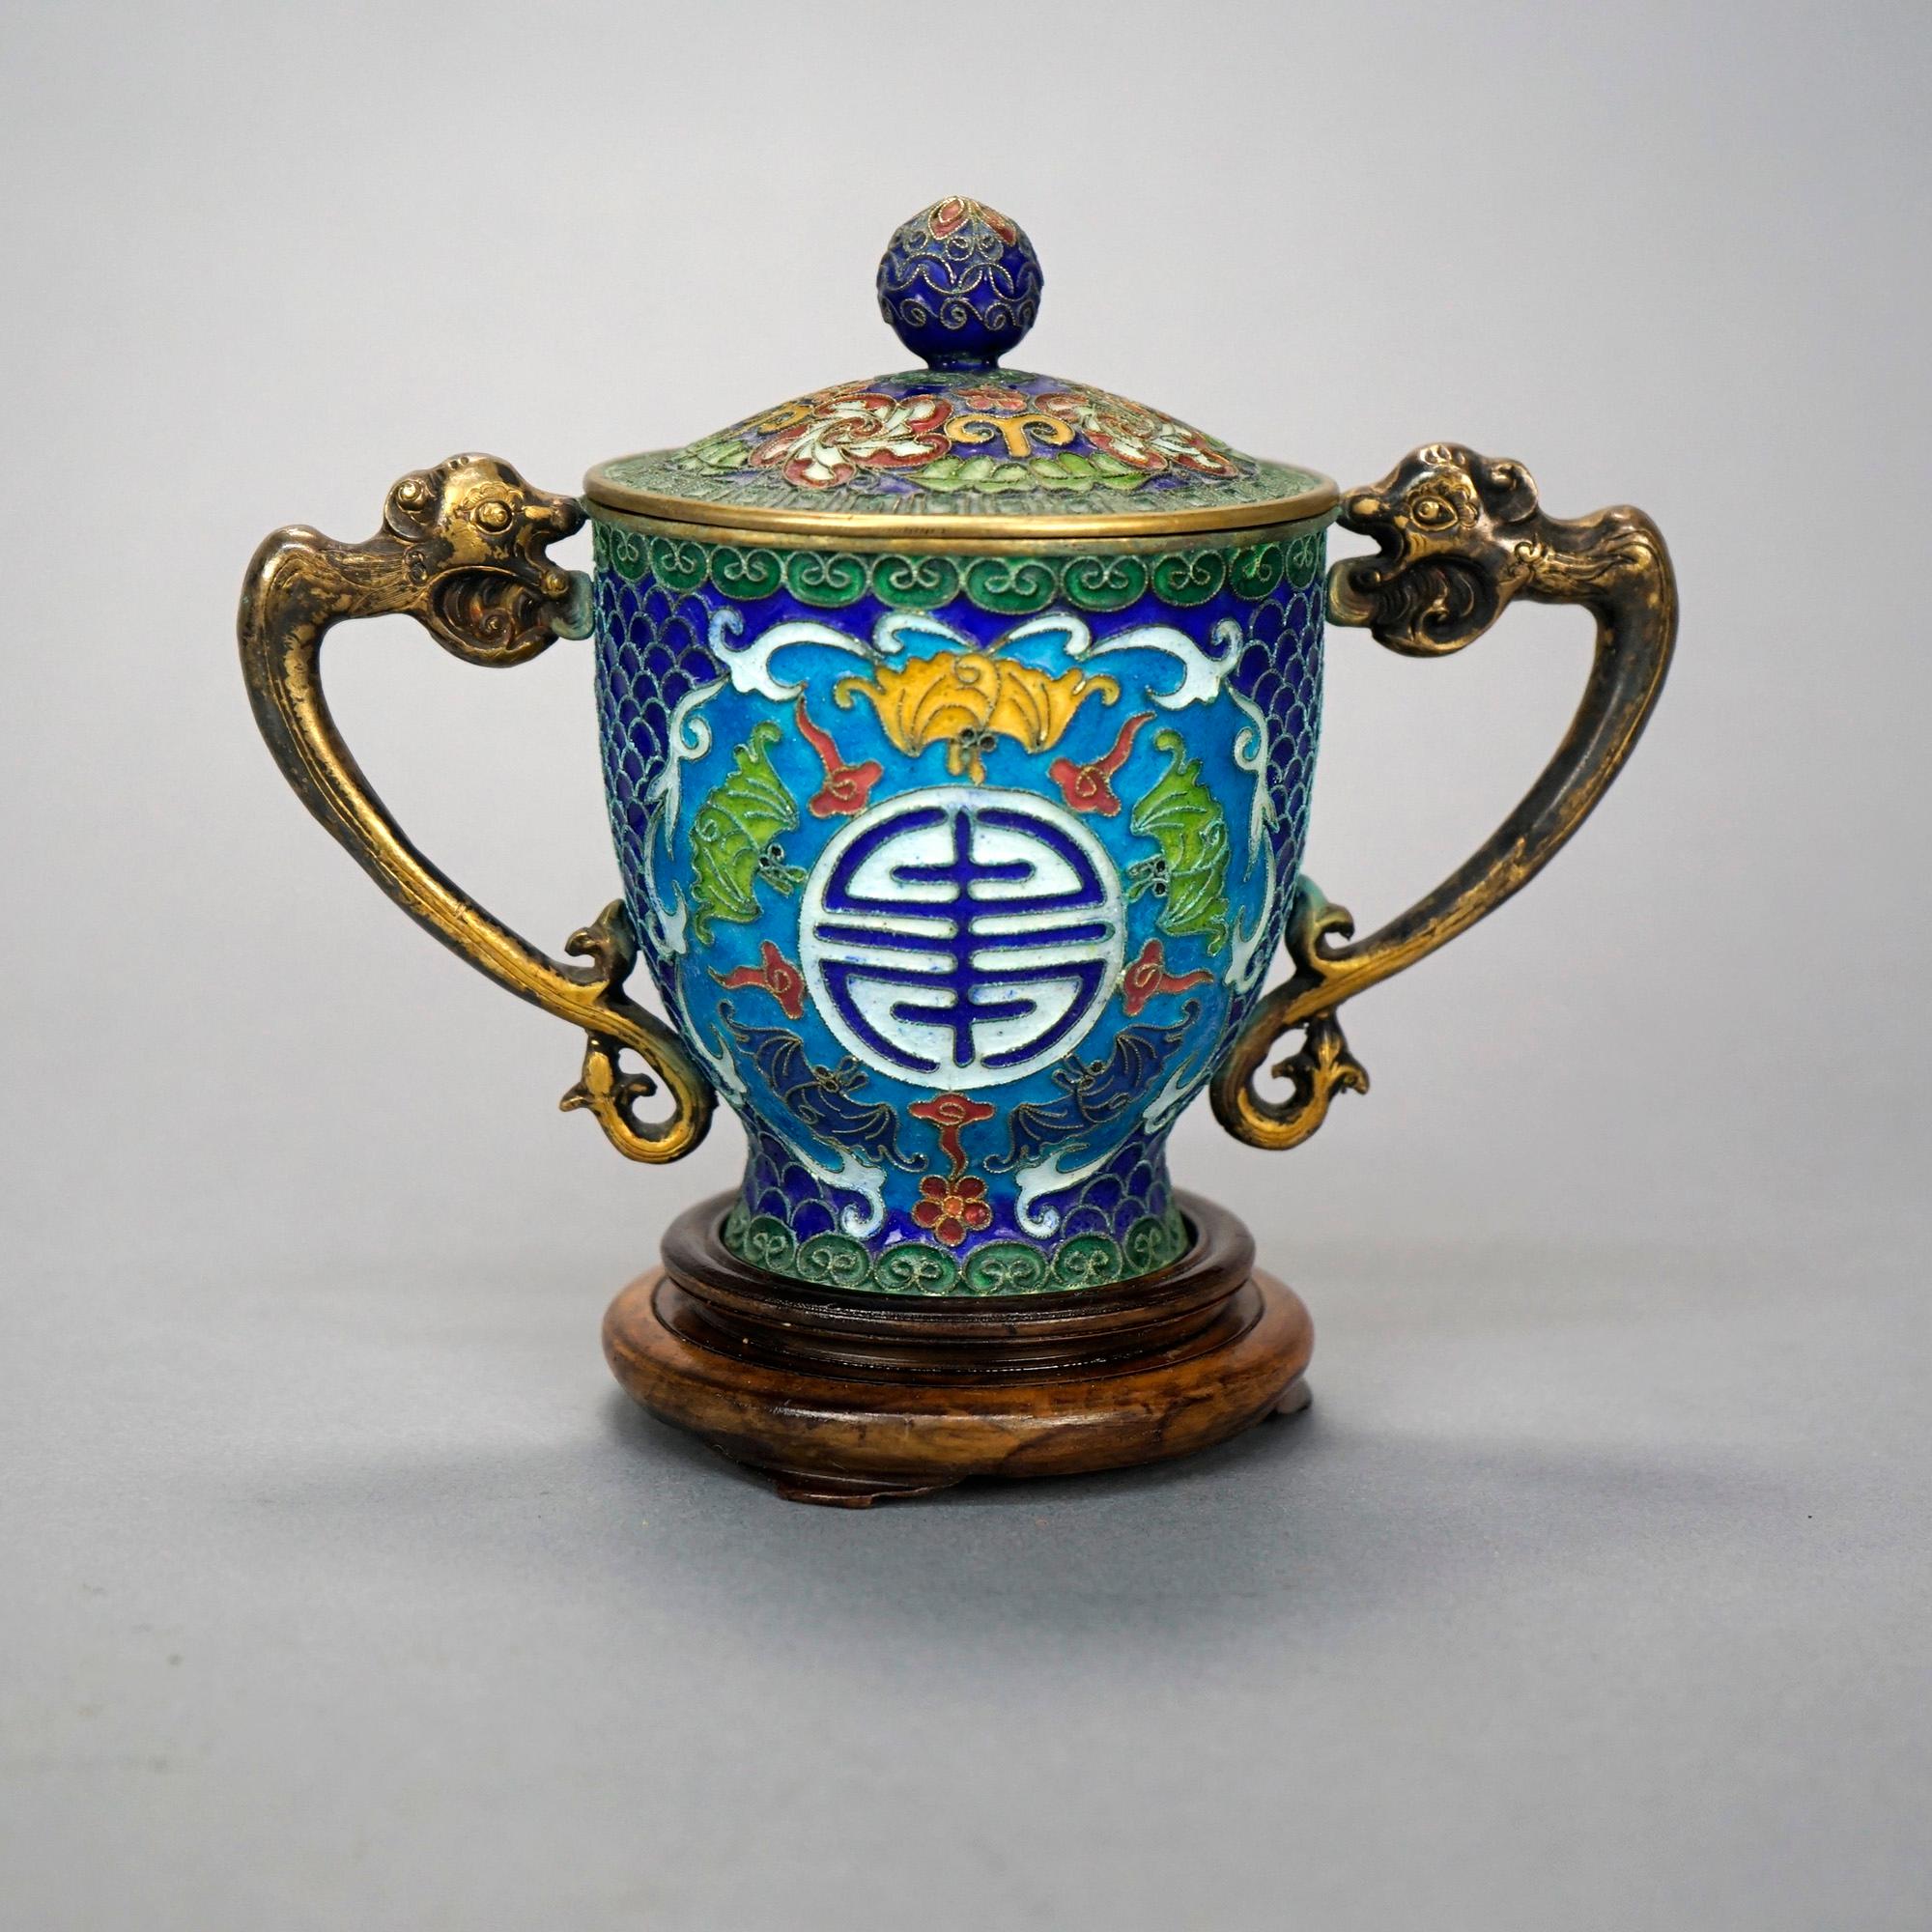 A Chinese covered urn offers Champleve construction with cast double handles in dolphin form, lidded vessel having enameled Good Luck symbol reserve, foliate rams horns and scroll elements, raised on footed base, 20th century

Measures- 5.75'' H x